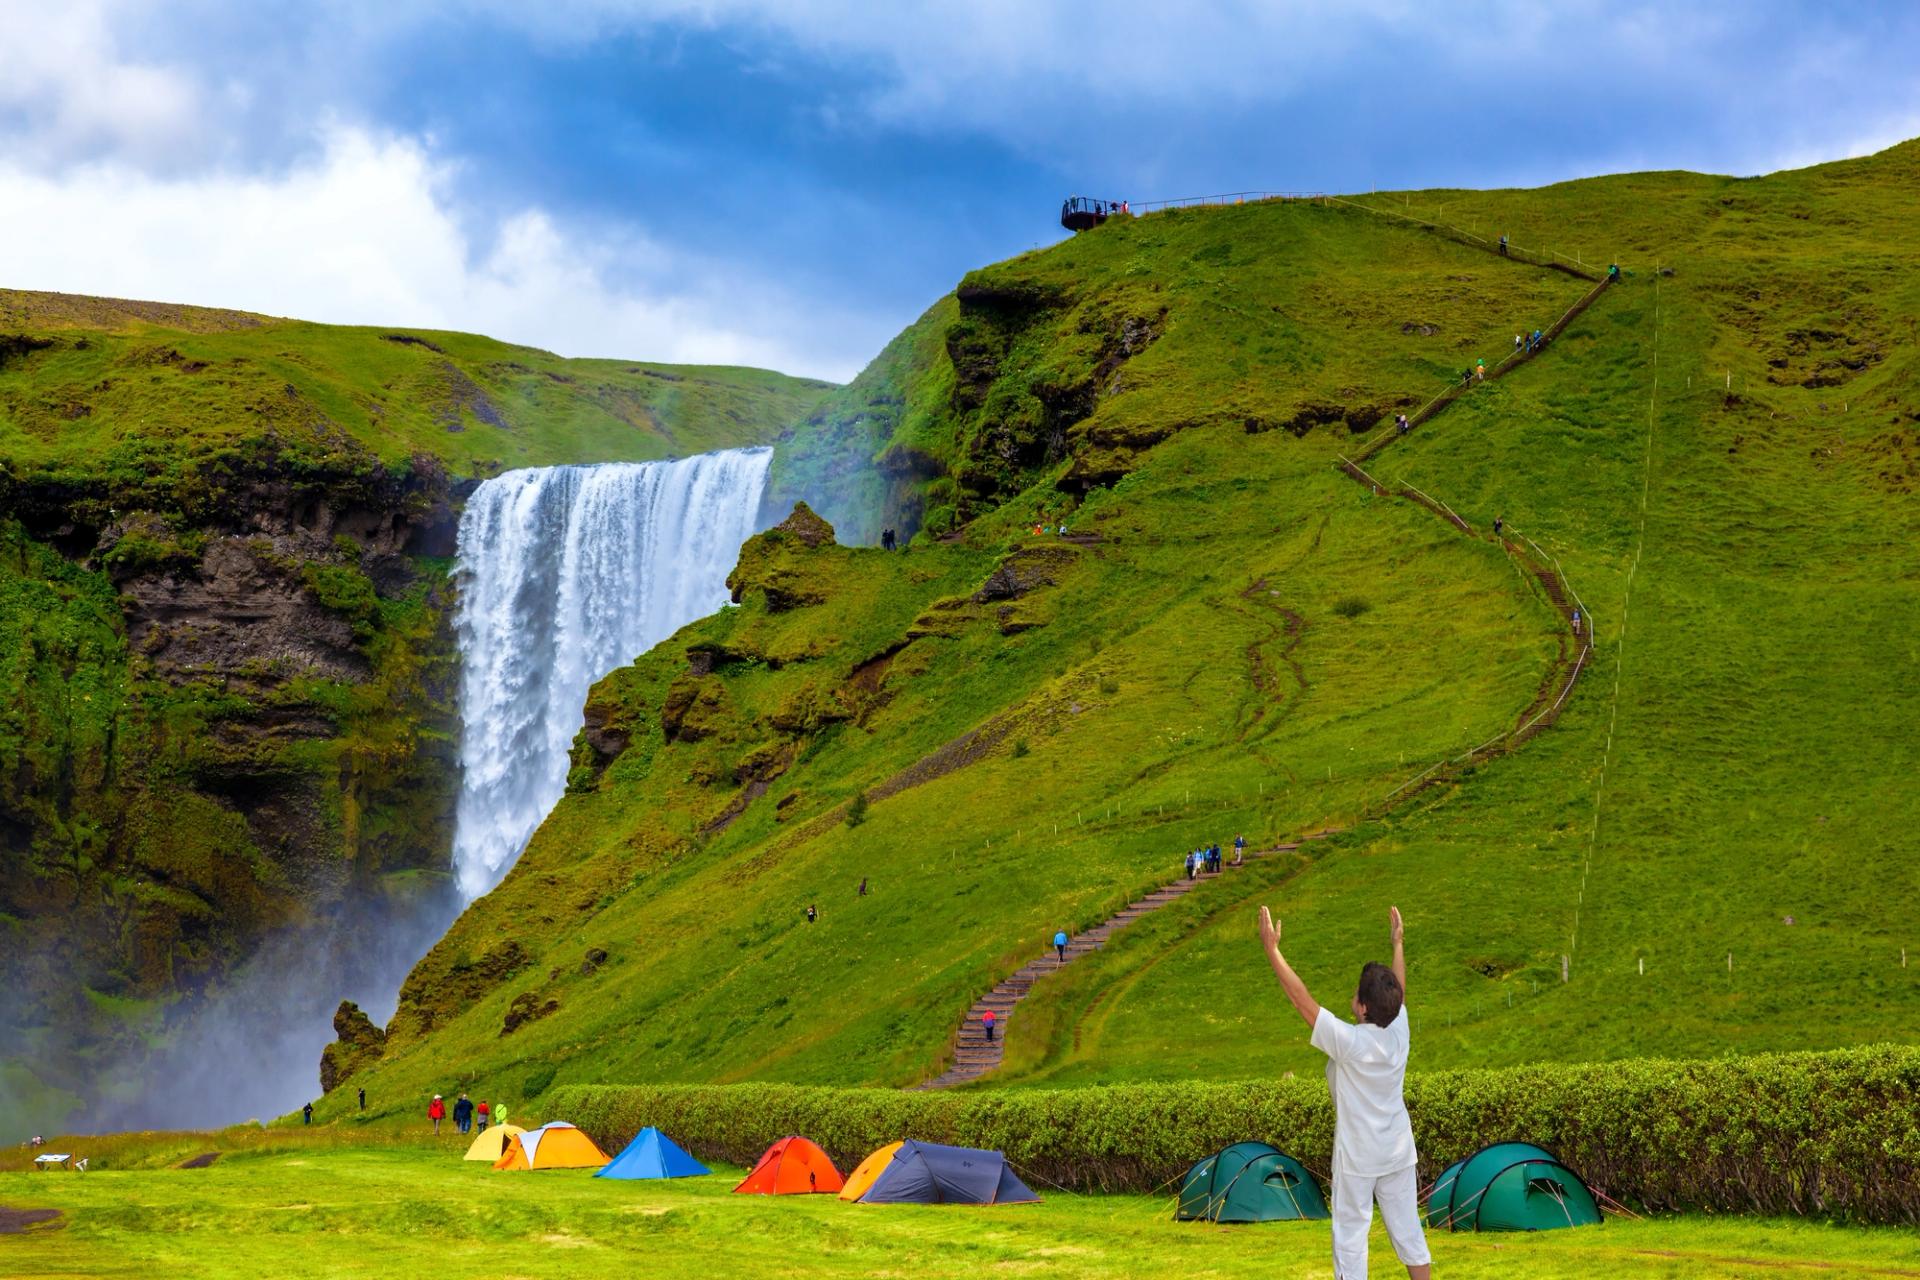 Near a waterfall in Iceland a tourist tents